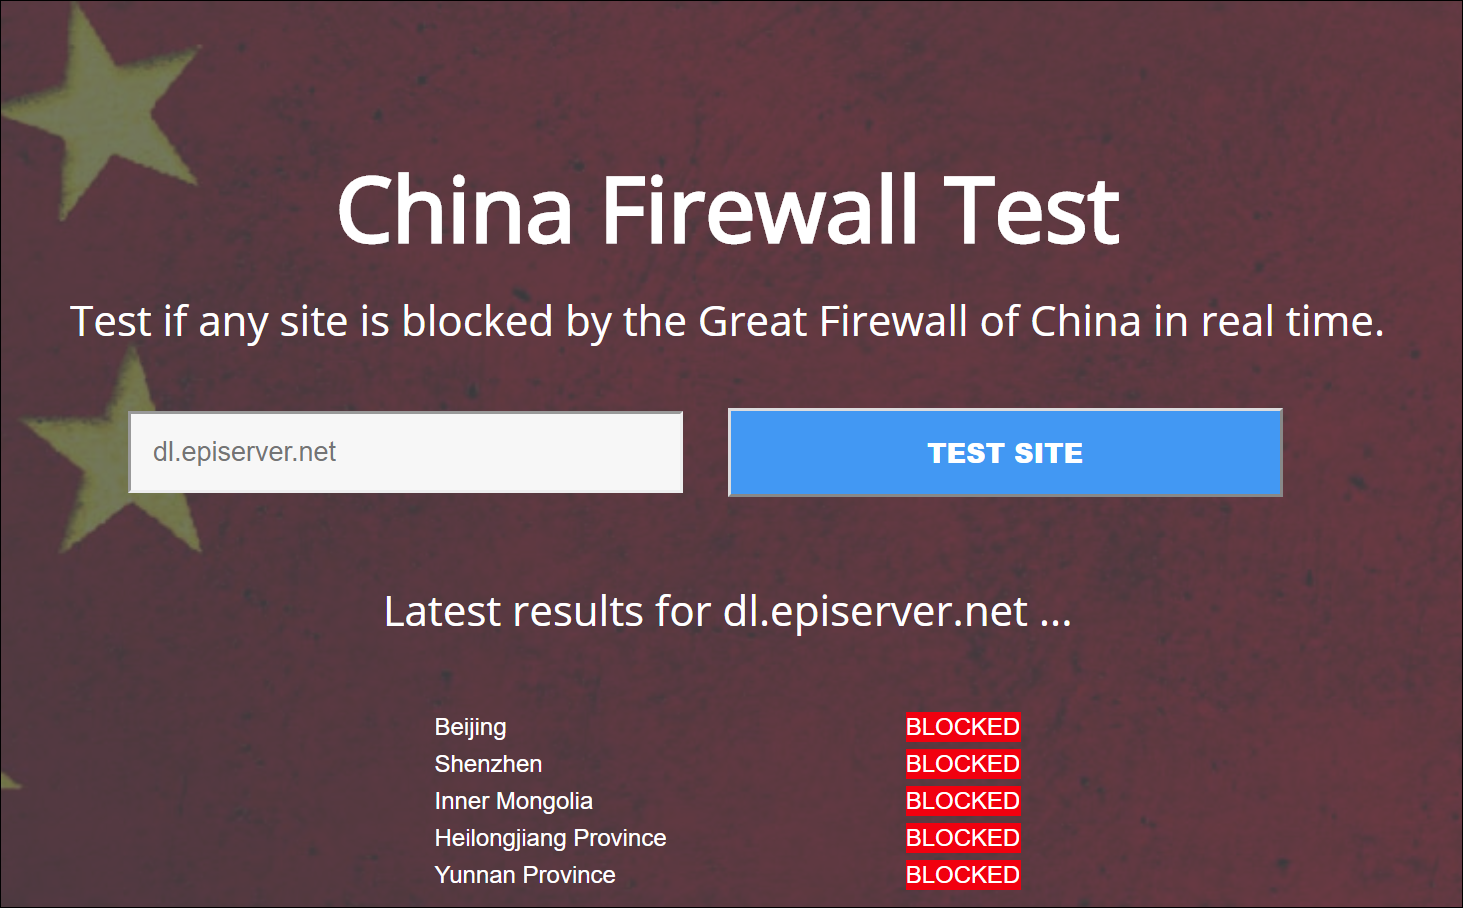 A tool that show dl.episerver.net is blocked in China